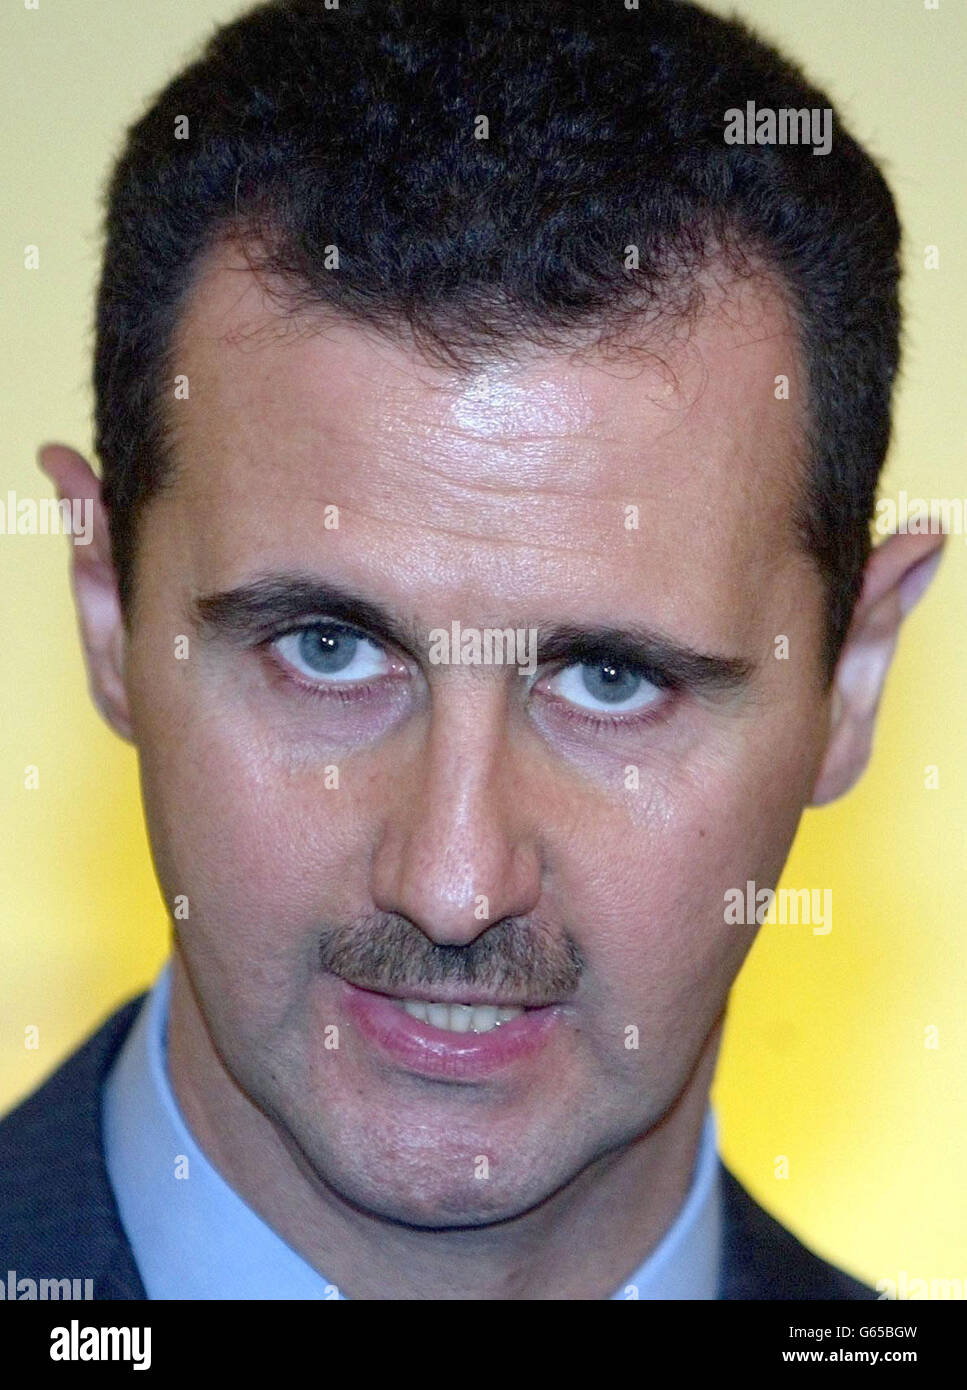 The President of Syria, Bashar Al-Assad addresses the media during a joint press conference with the British Prime Minister Tony Blair, in Downing St, London. Stock Photo